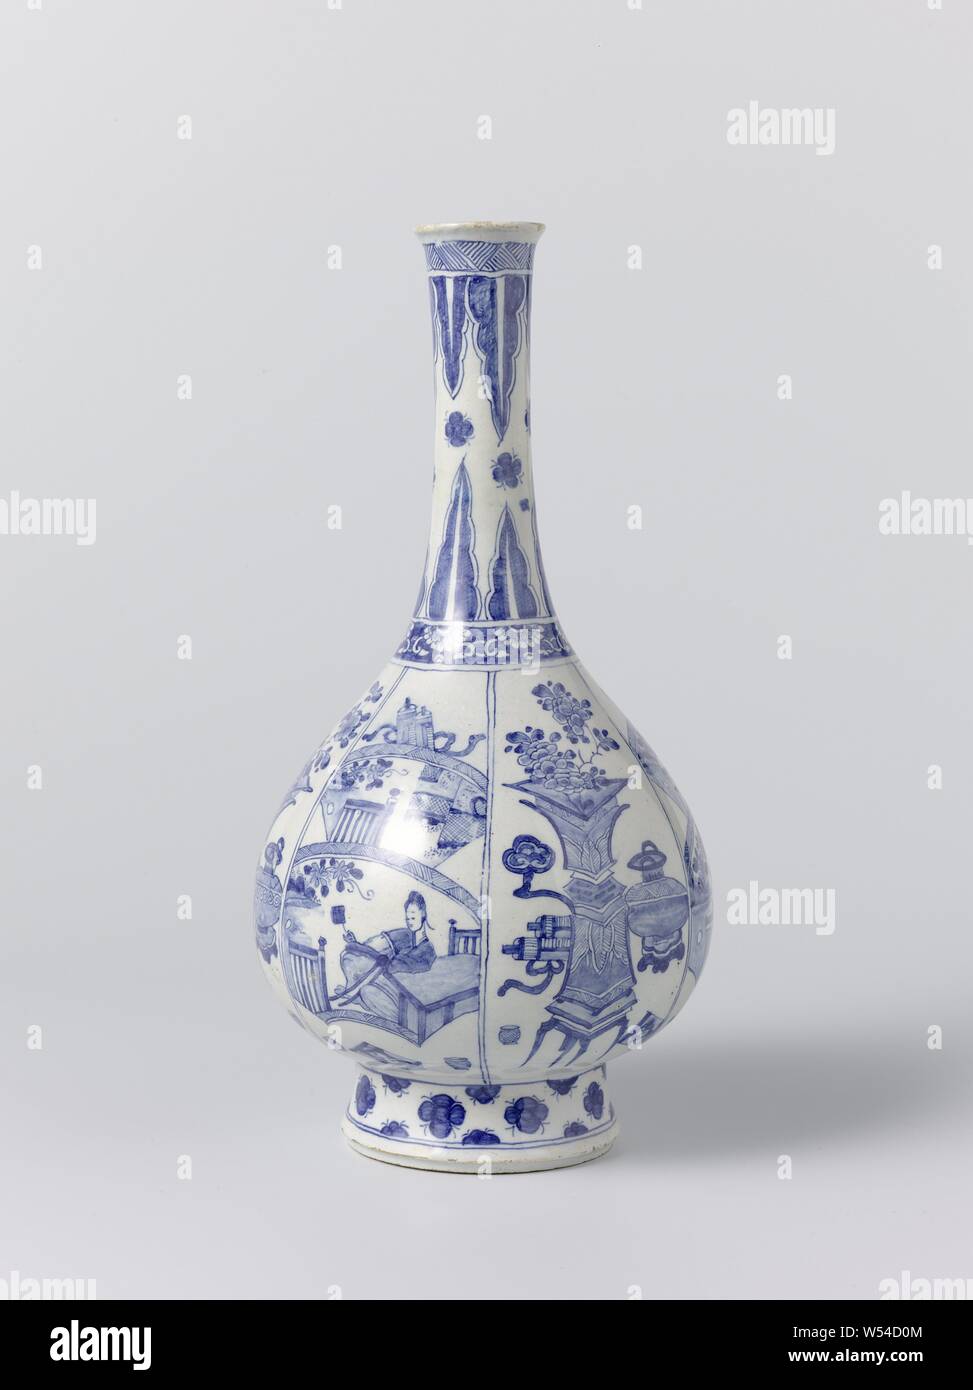 Vase Vase, Vase of faience after the example of Chinese porcelain from the Kangxi period, Chinese (other cultural aspects), De Grieksche A, Delft, c. 1722 - c. 1757, h 26.2 cm × d 13 cm, Weesp, c. 1759–1771 Stock Photo